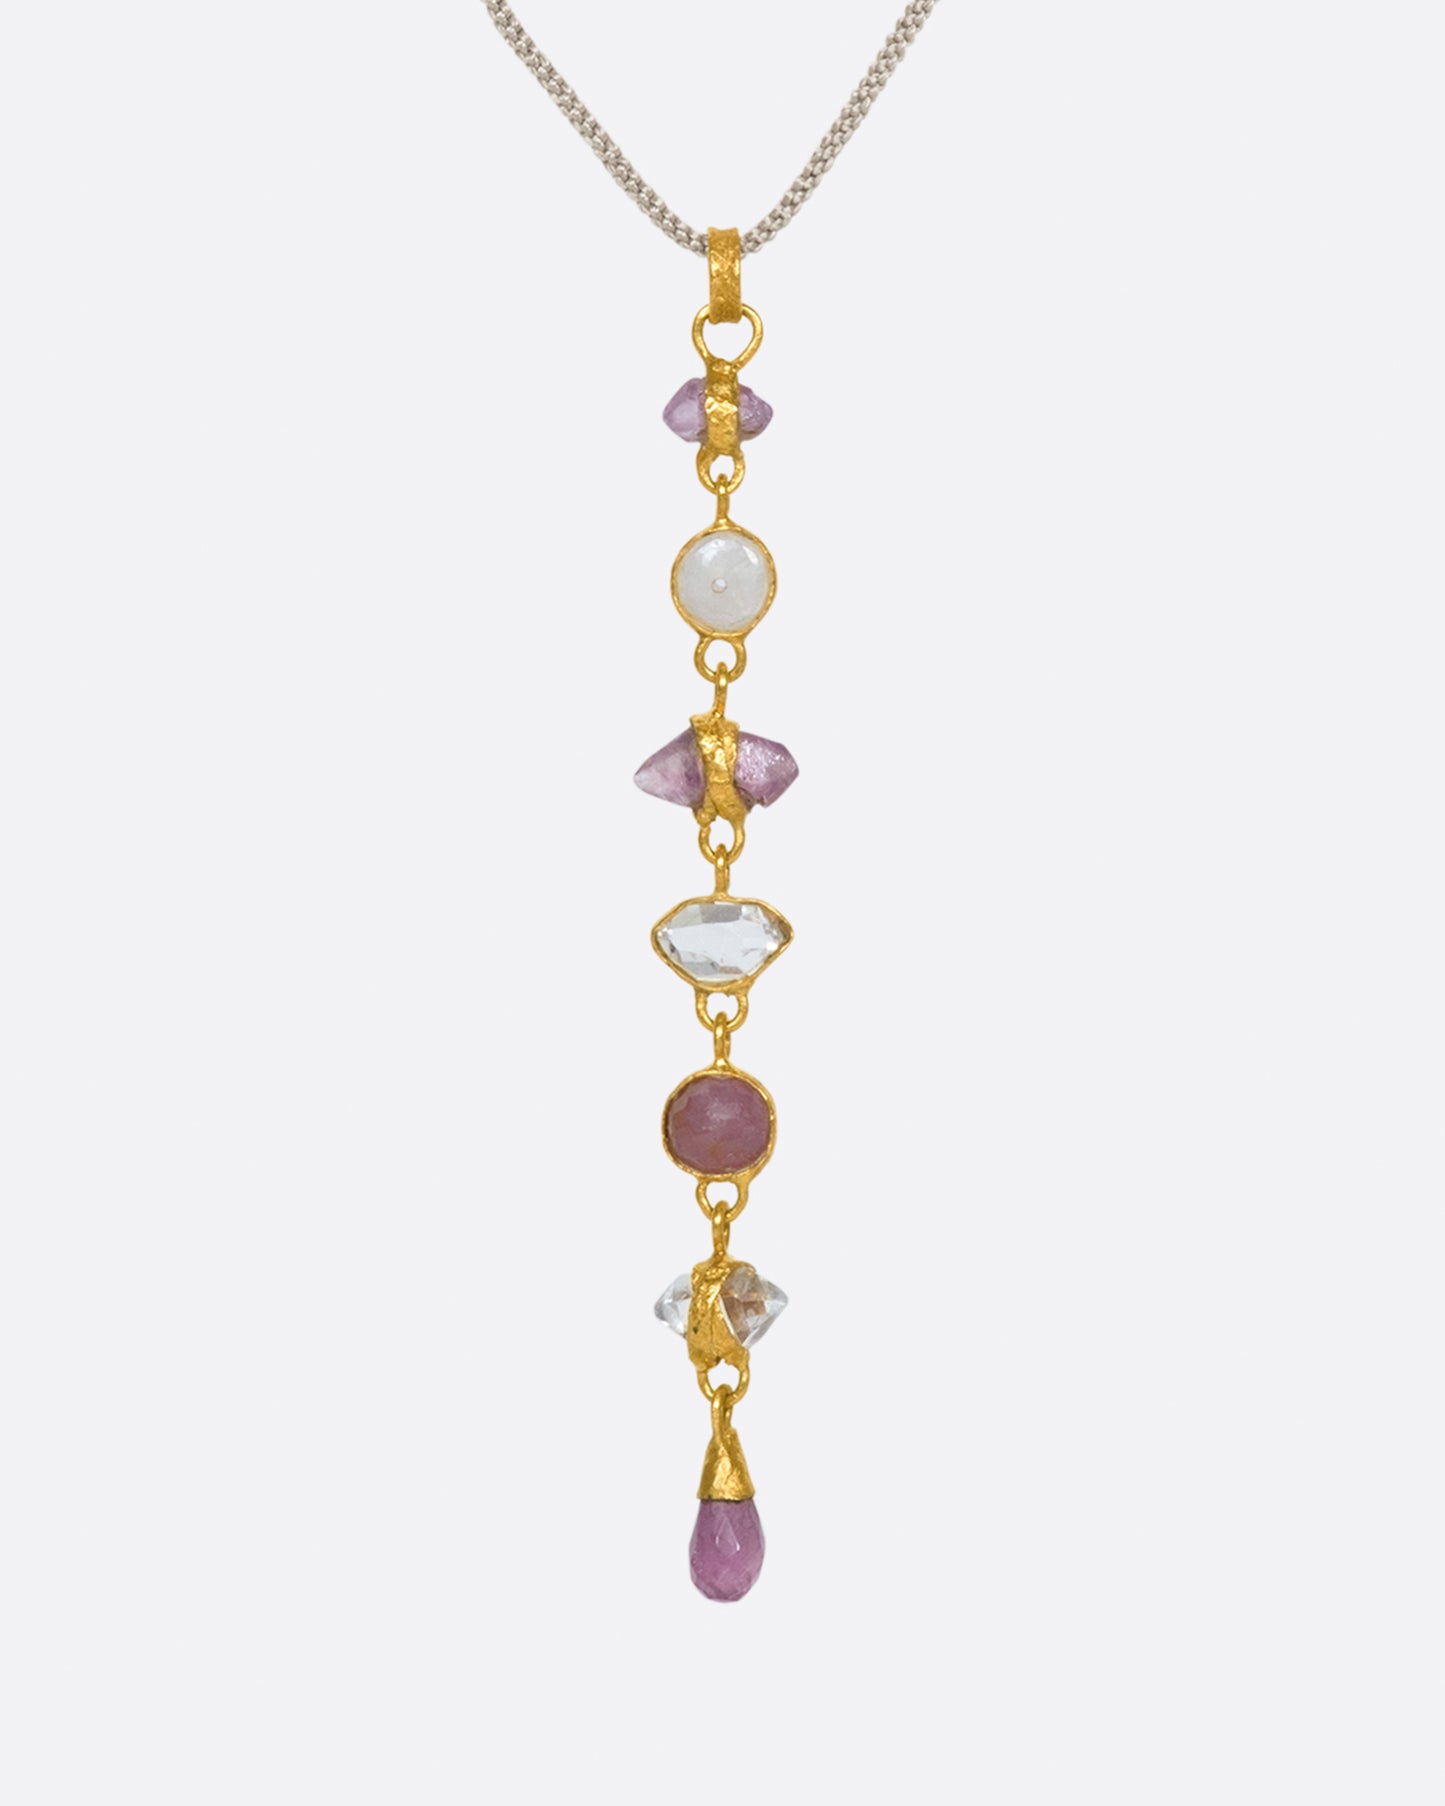 This high karat gold pendant features alternating rubies and herikmer diamonds with a matching pink sapphire drop at the bottom.